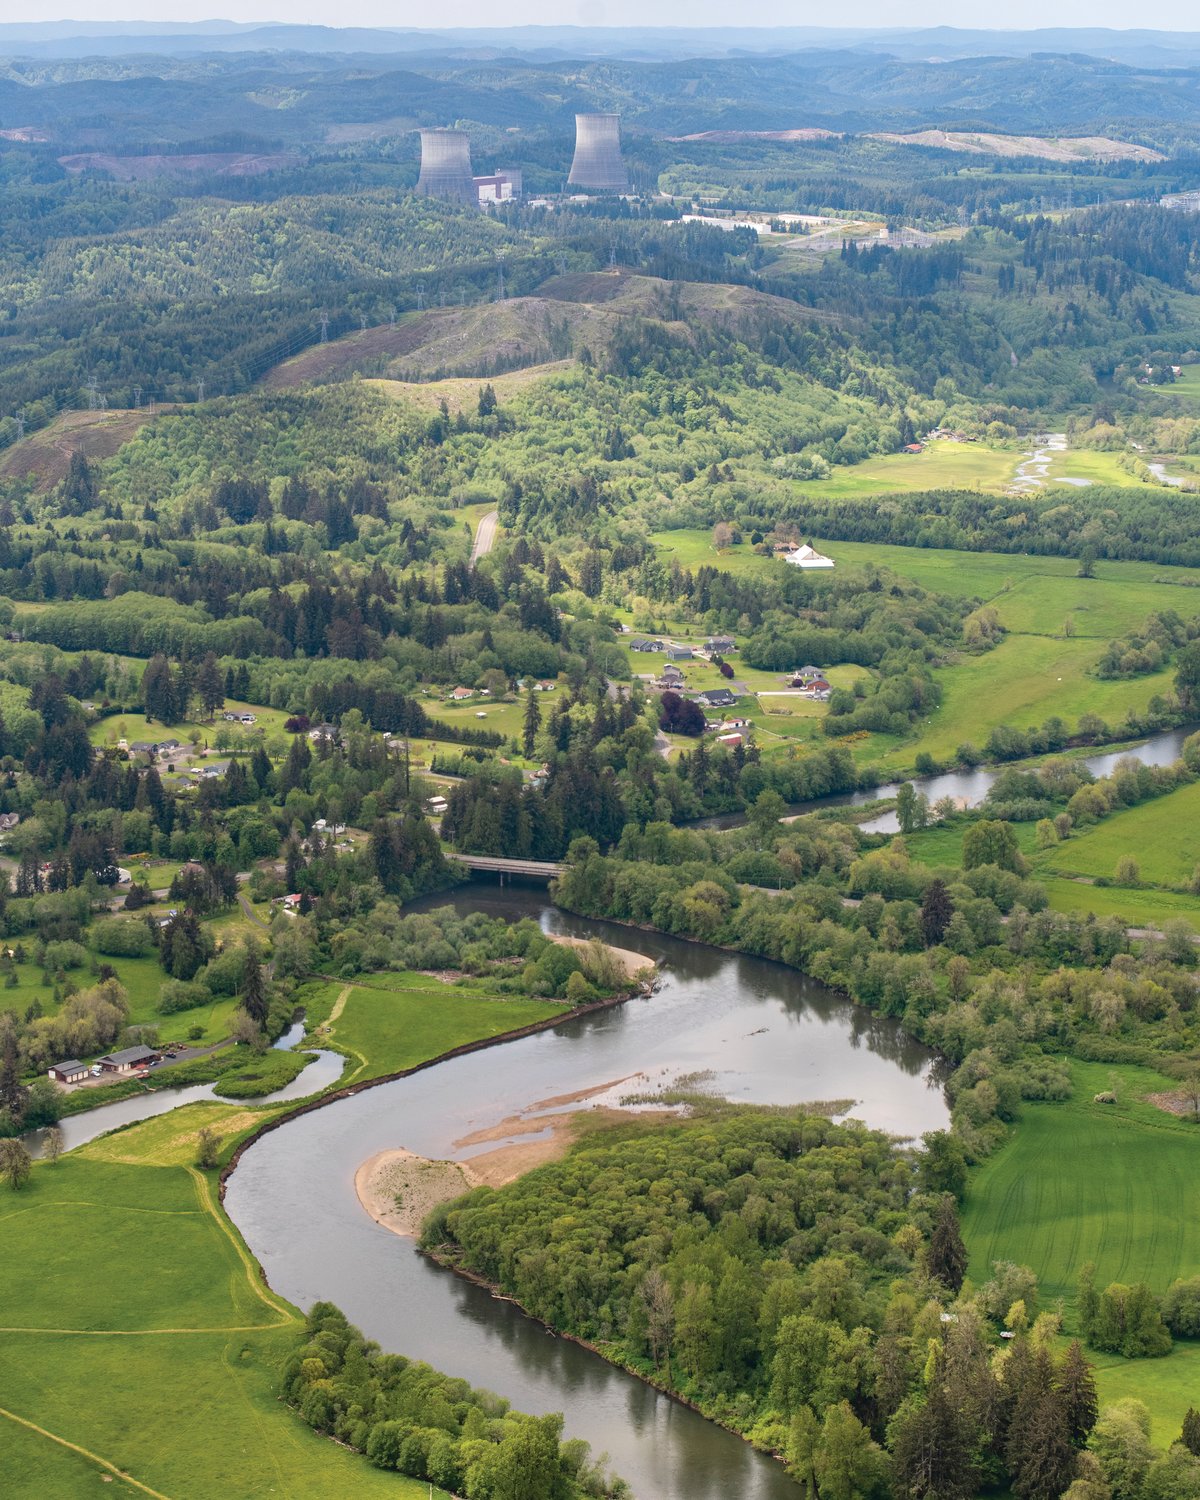 The Chehalis River flows past the Satsop Business Park on Friday, May 20, 2022.